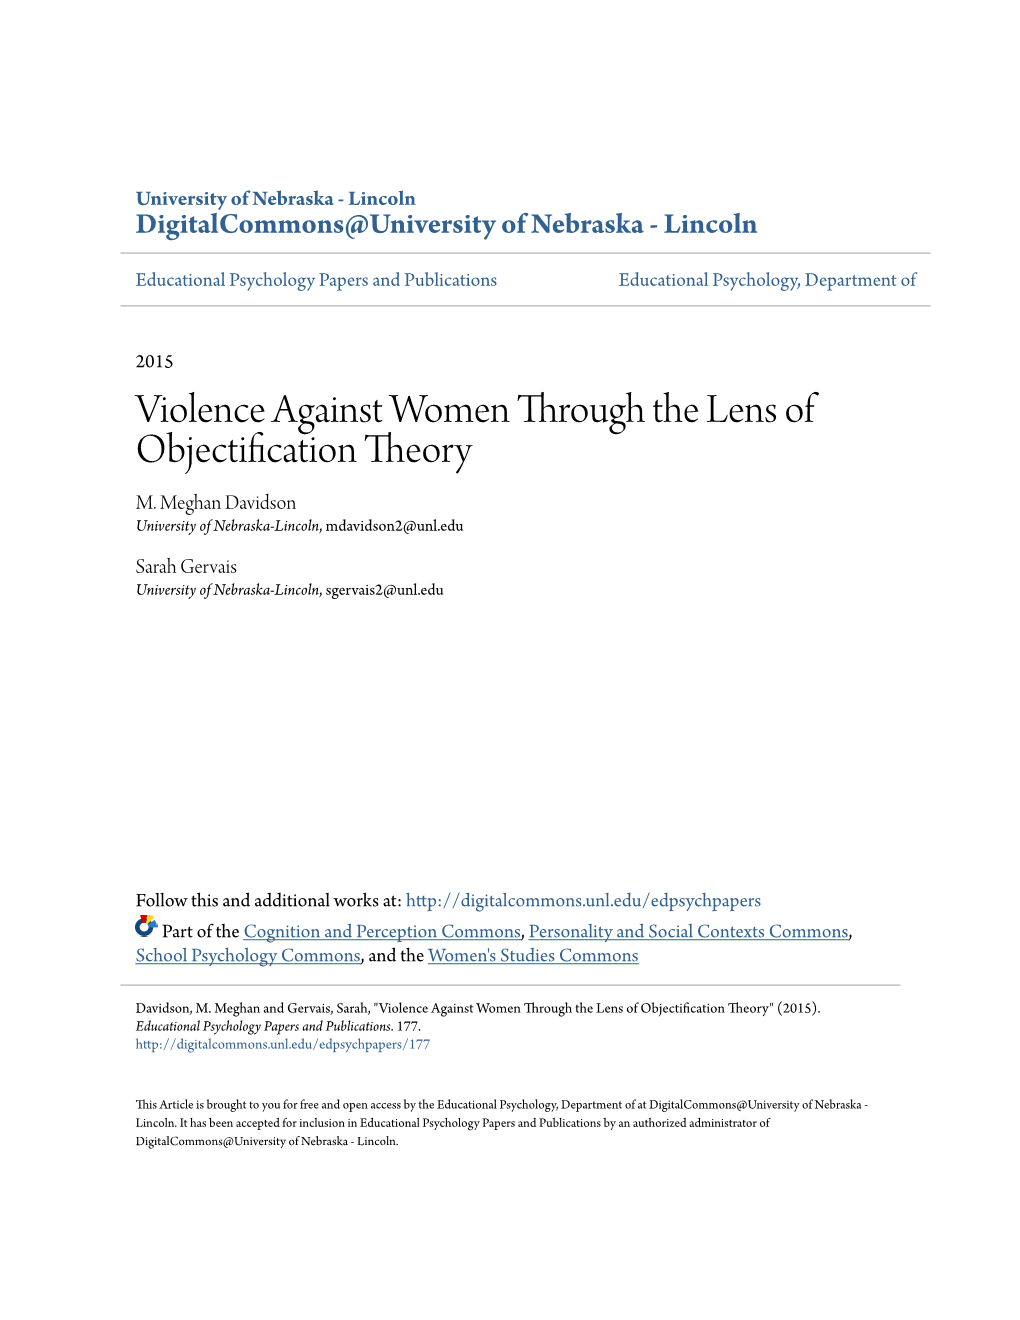 Violence Against Women Through the Lens of Objectification Theory M